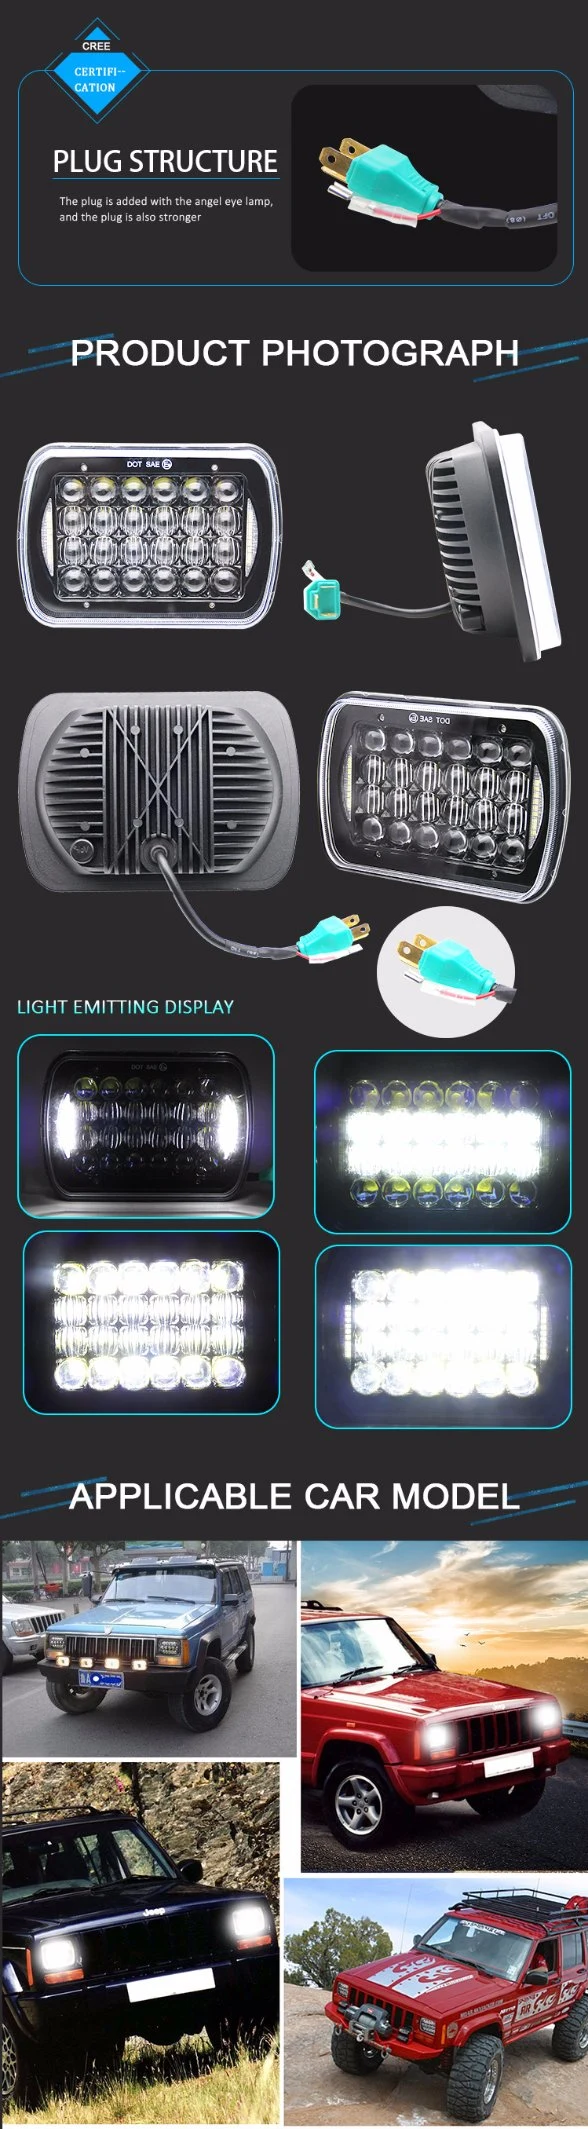 Auto Lighting System Super Bright 7inch 5*7 Square LED Headlight for Truck